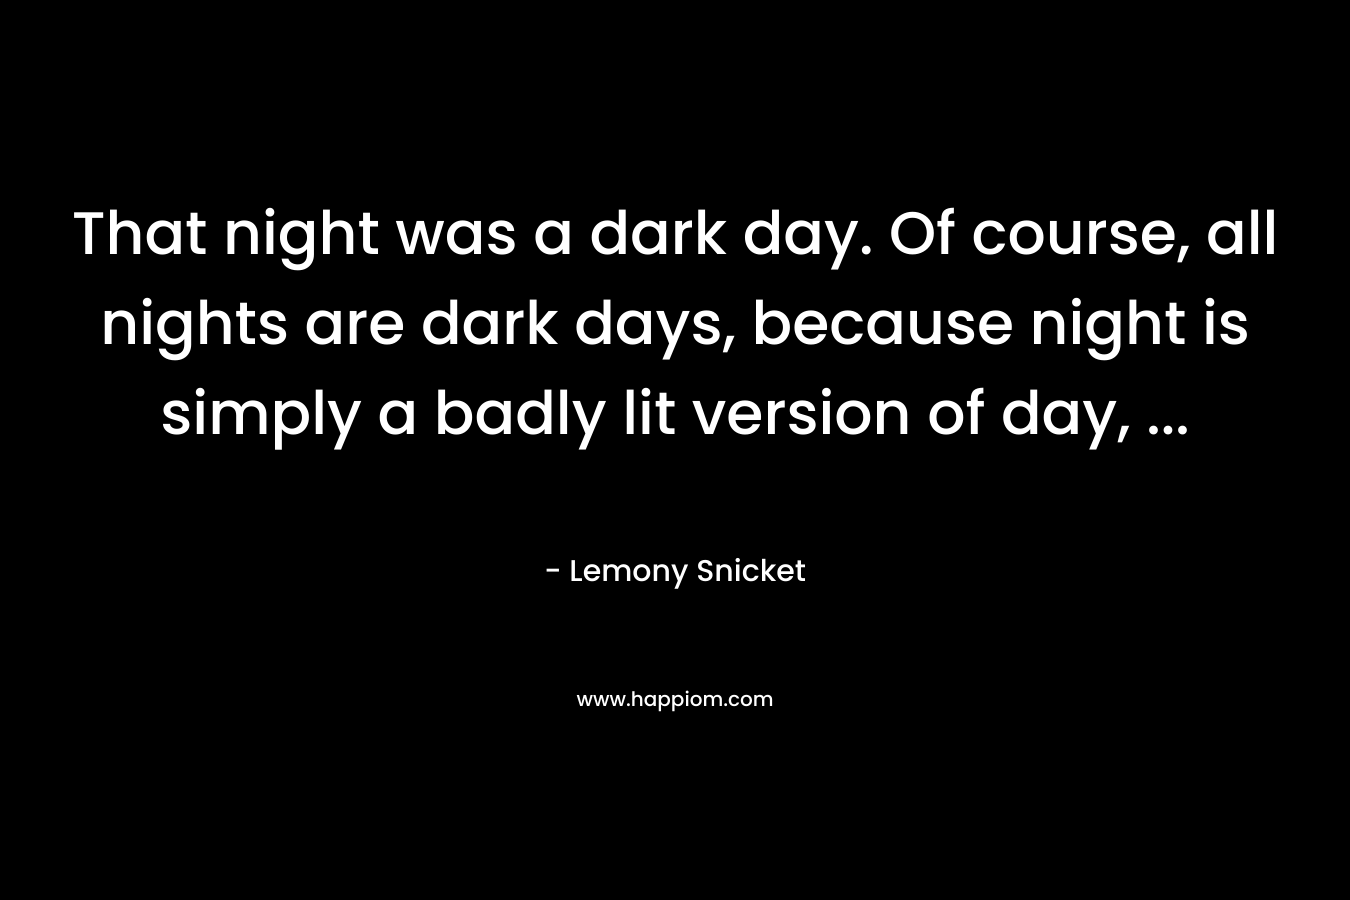 That night was a dark day. Of course, all nights are dark days, because night is simply a badly lit version of day, … – Lemony Snicket